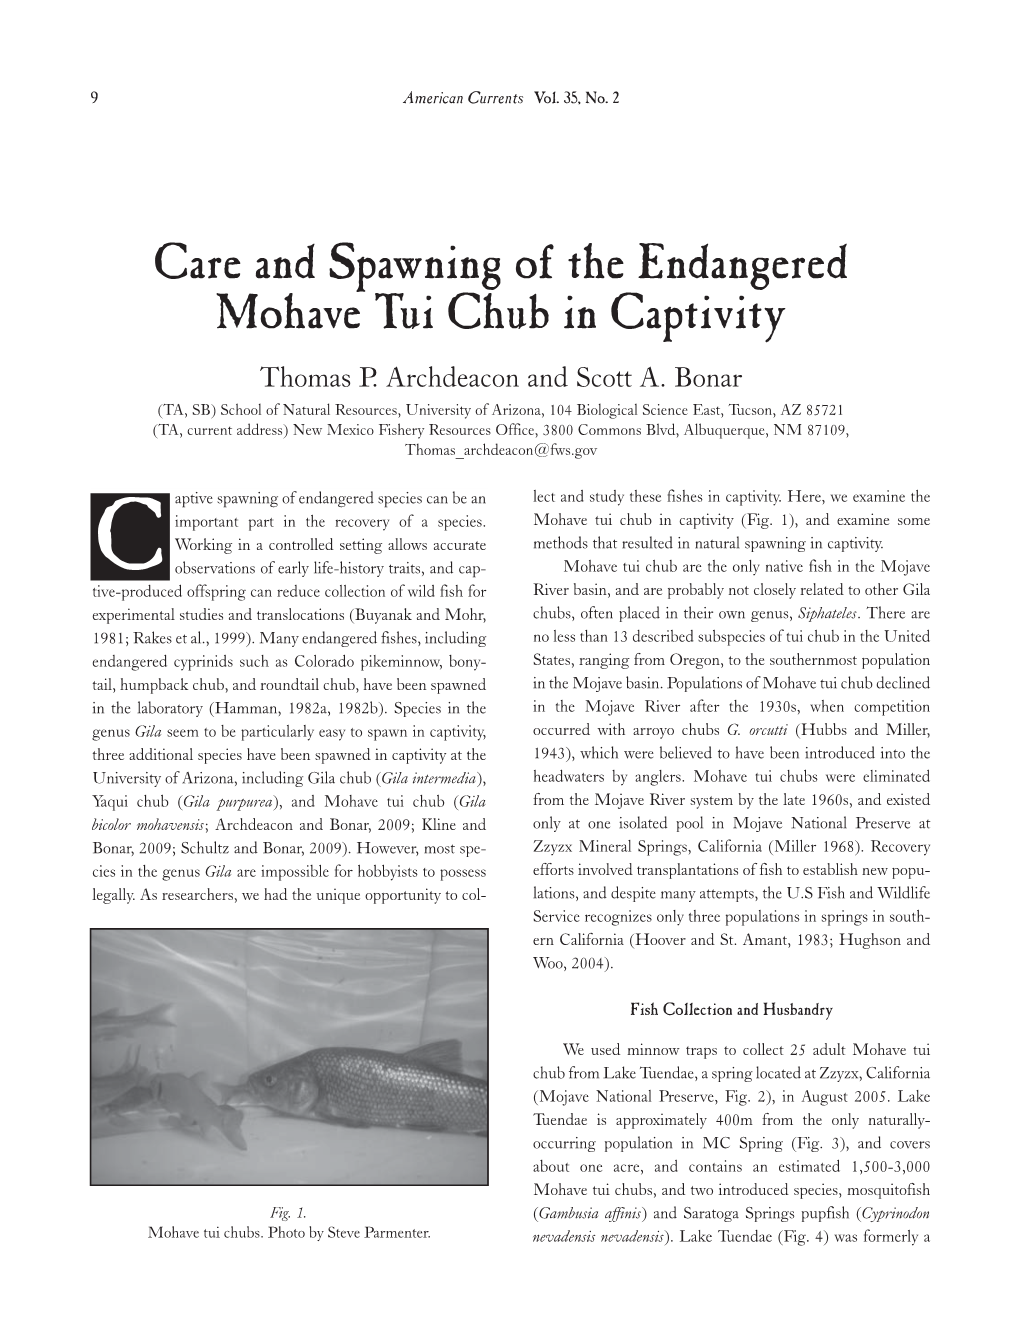 Care and Spawning of the Endangered Mohave Tui Chub in Captivity Thomas P